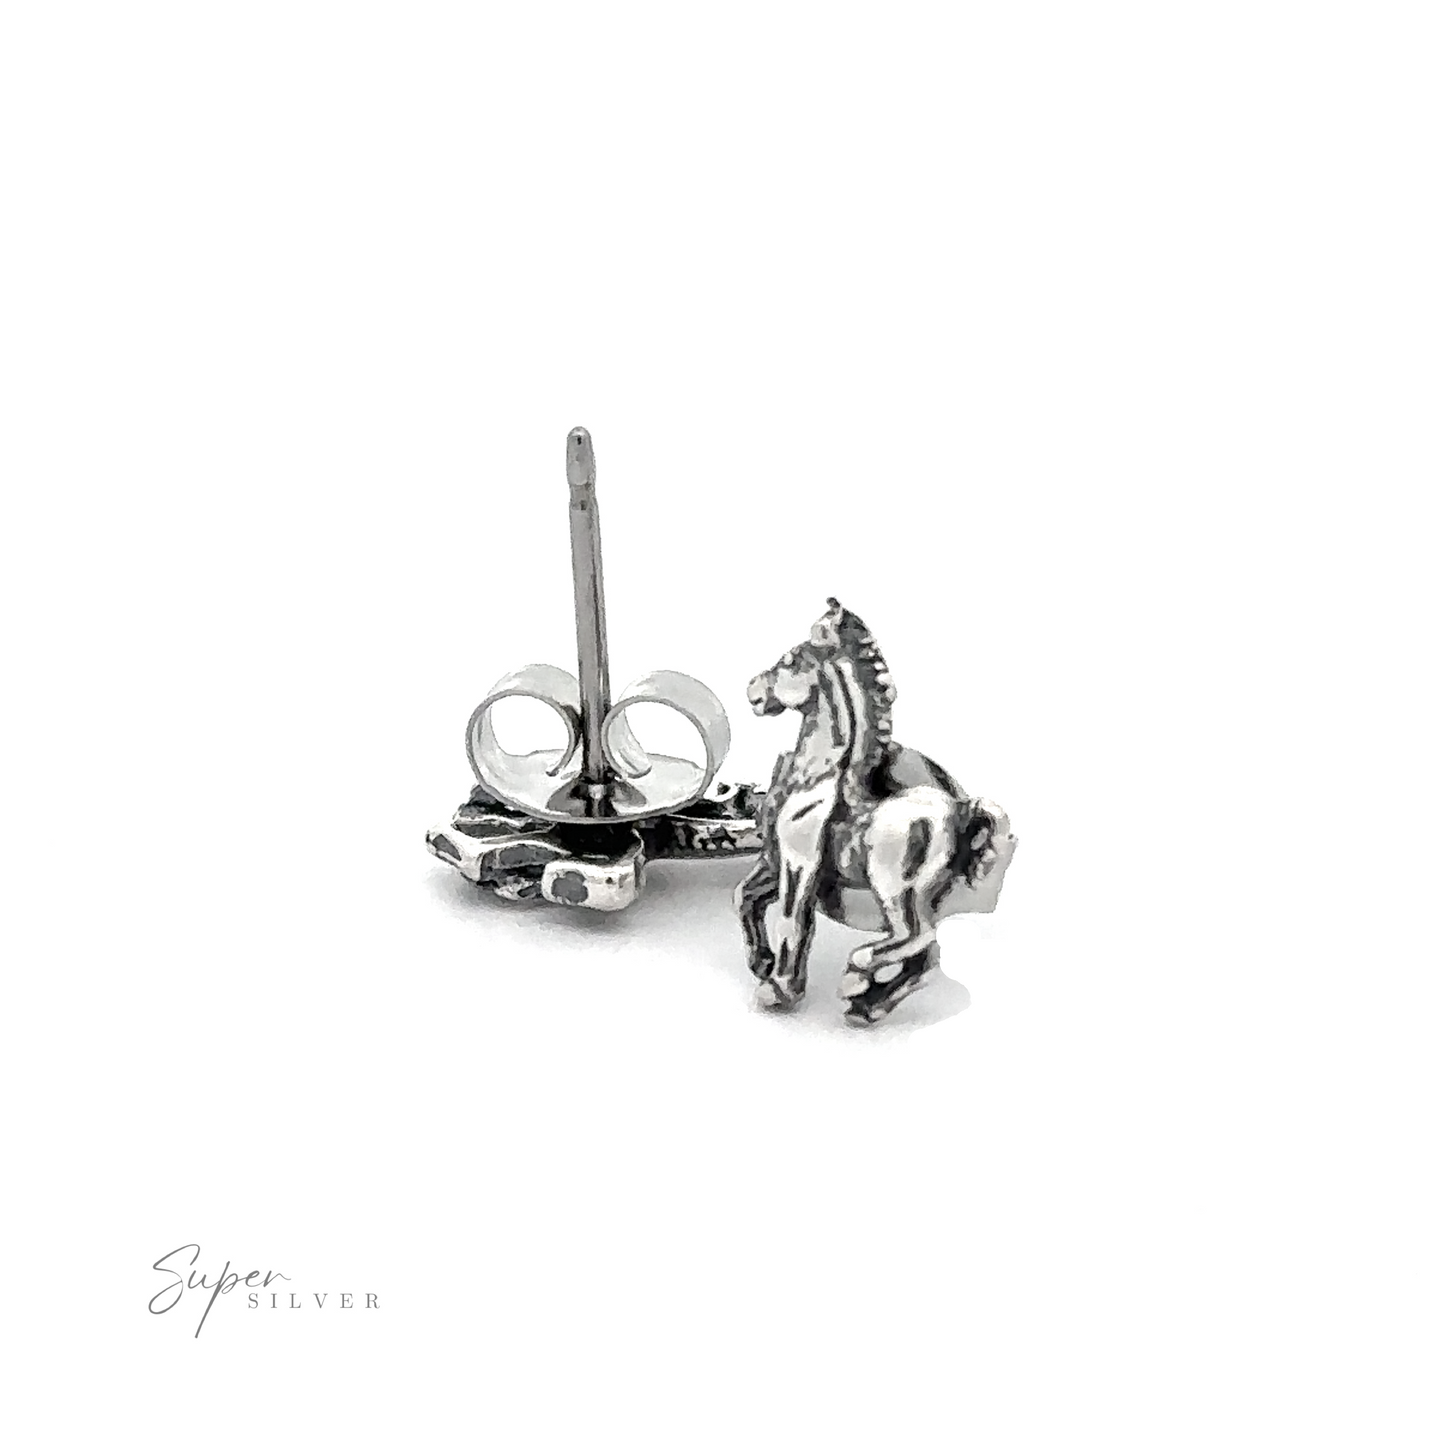 A pair of Horse Studs on a white background.